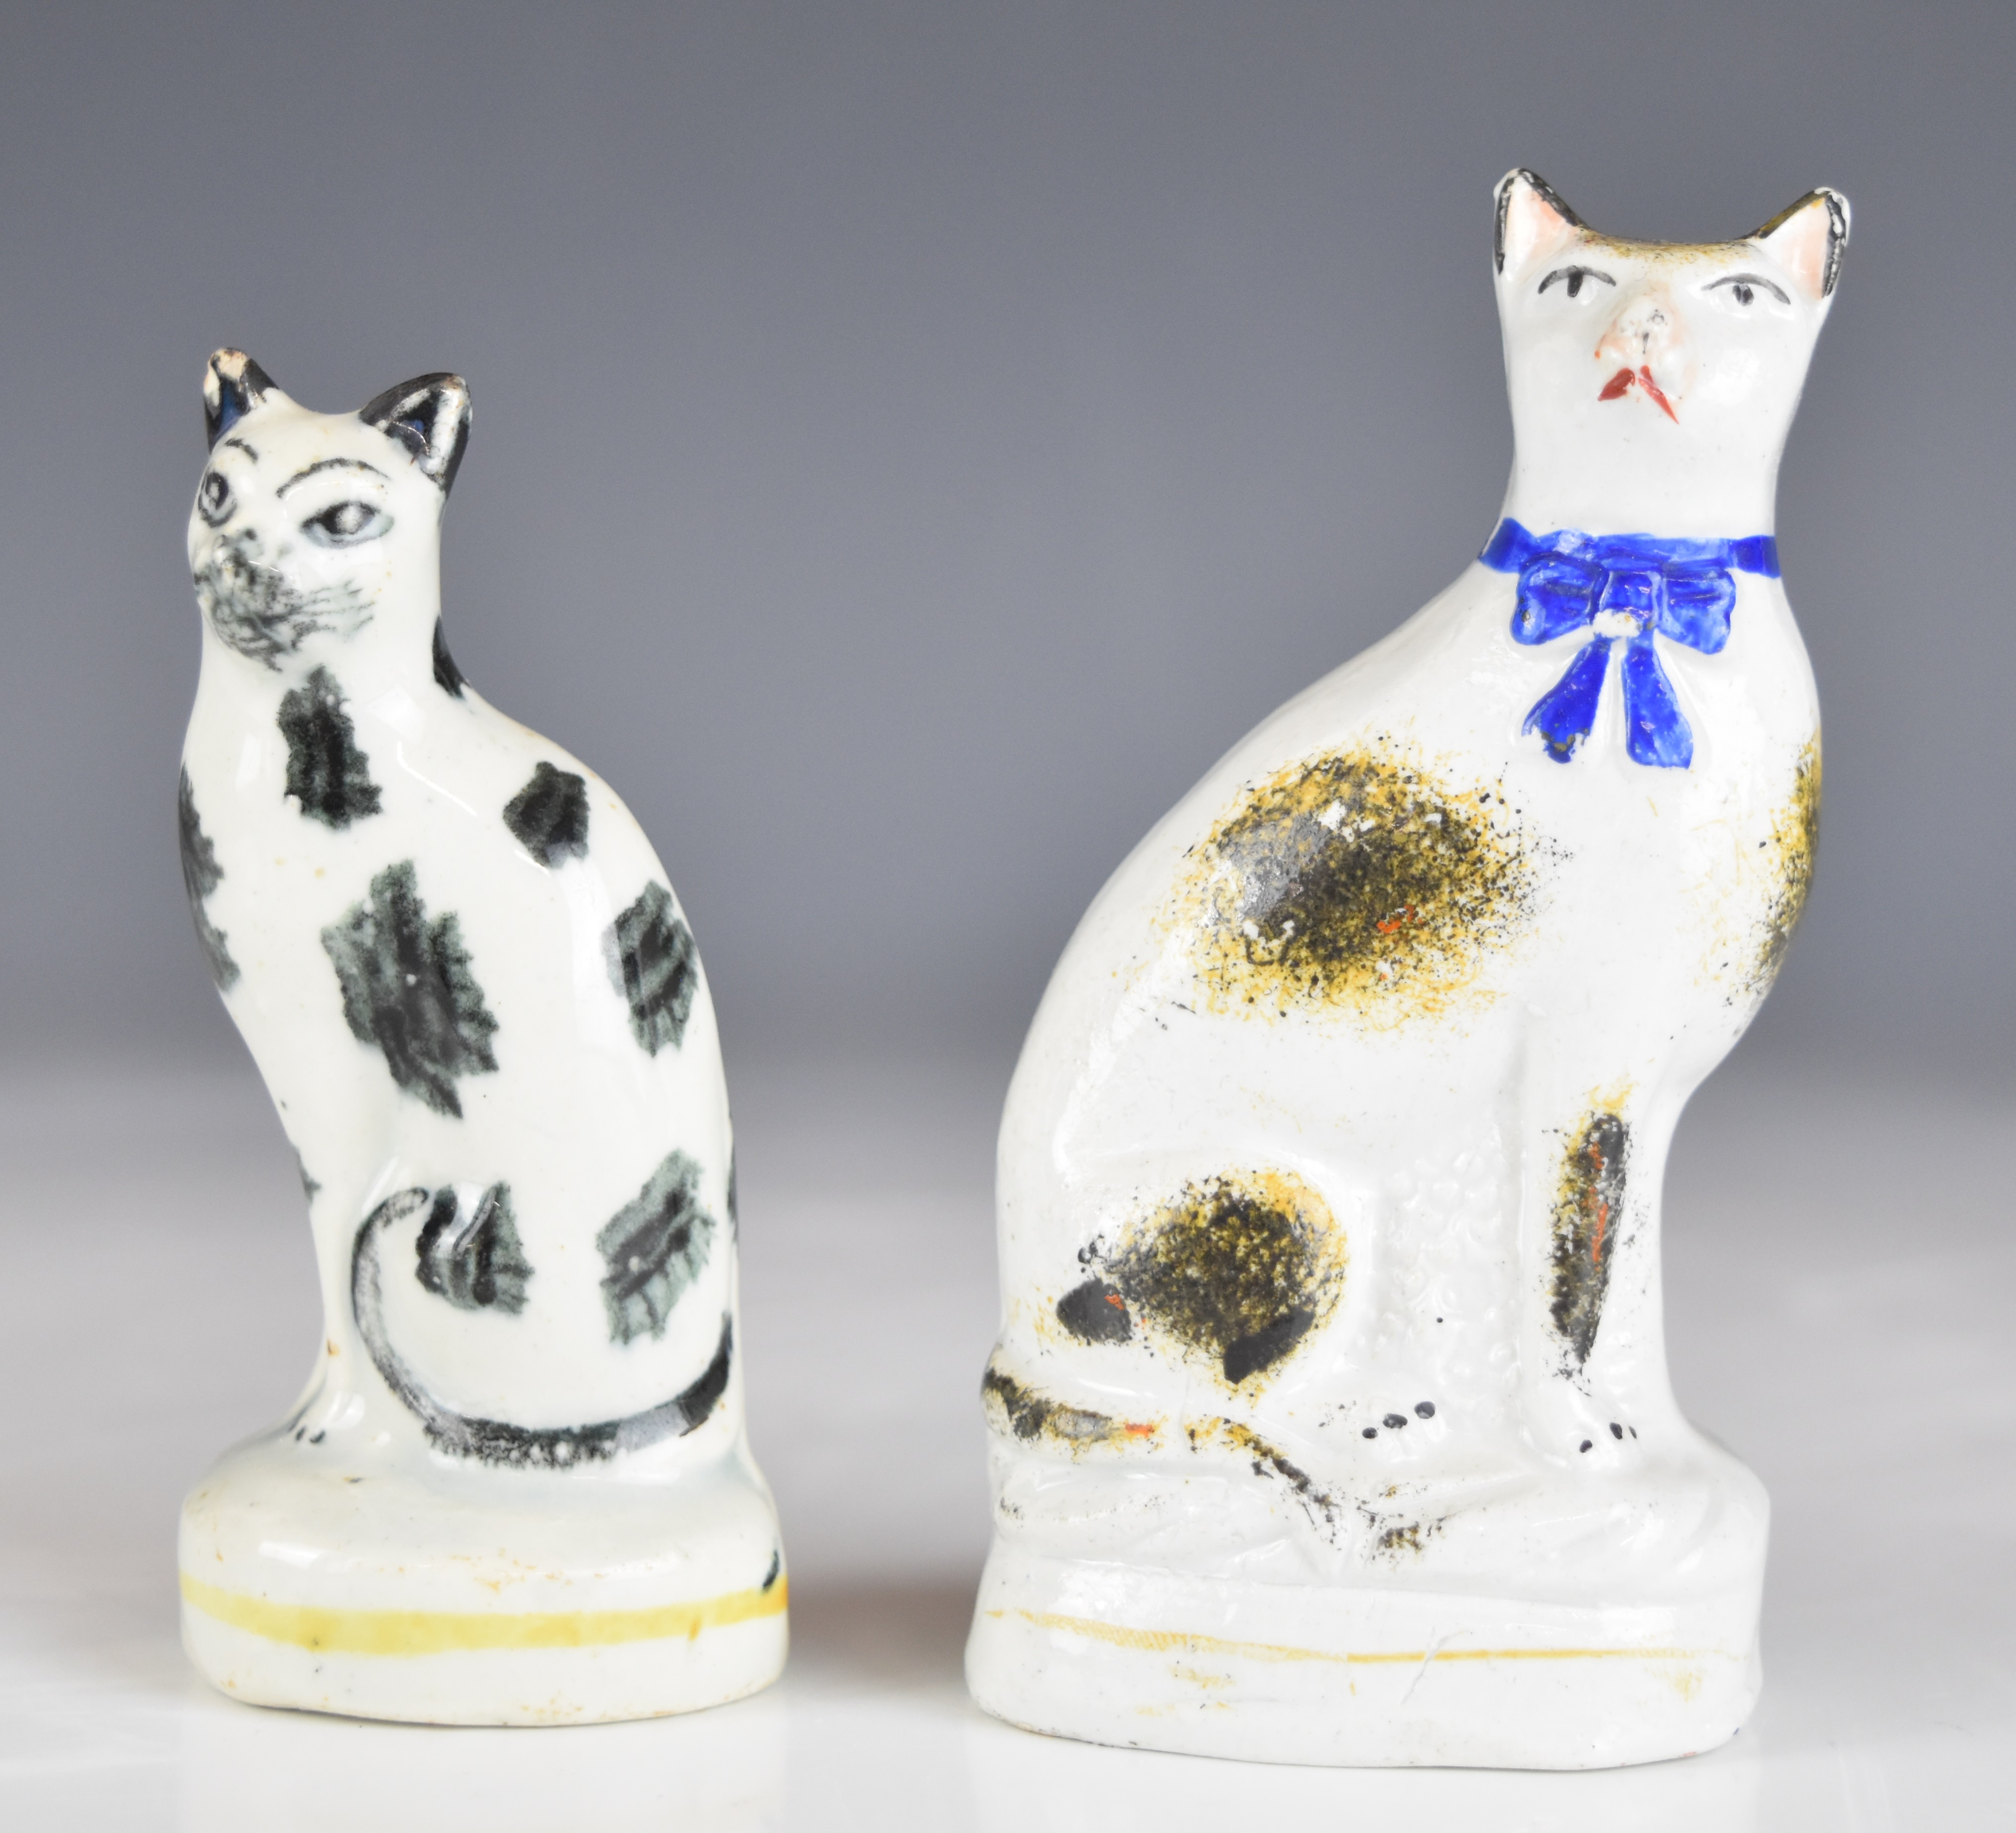 19thC miniature Staffordshire and salt glazed stoneware cat and dog figures including a cat with - Image 4 of 8